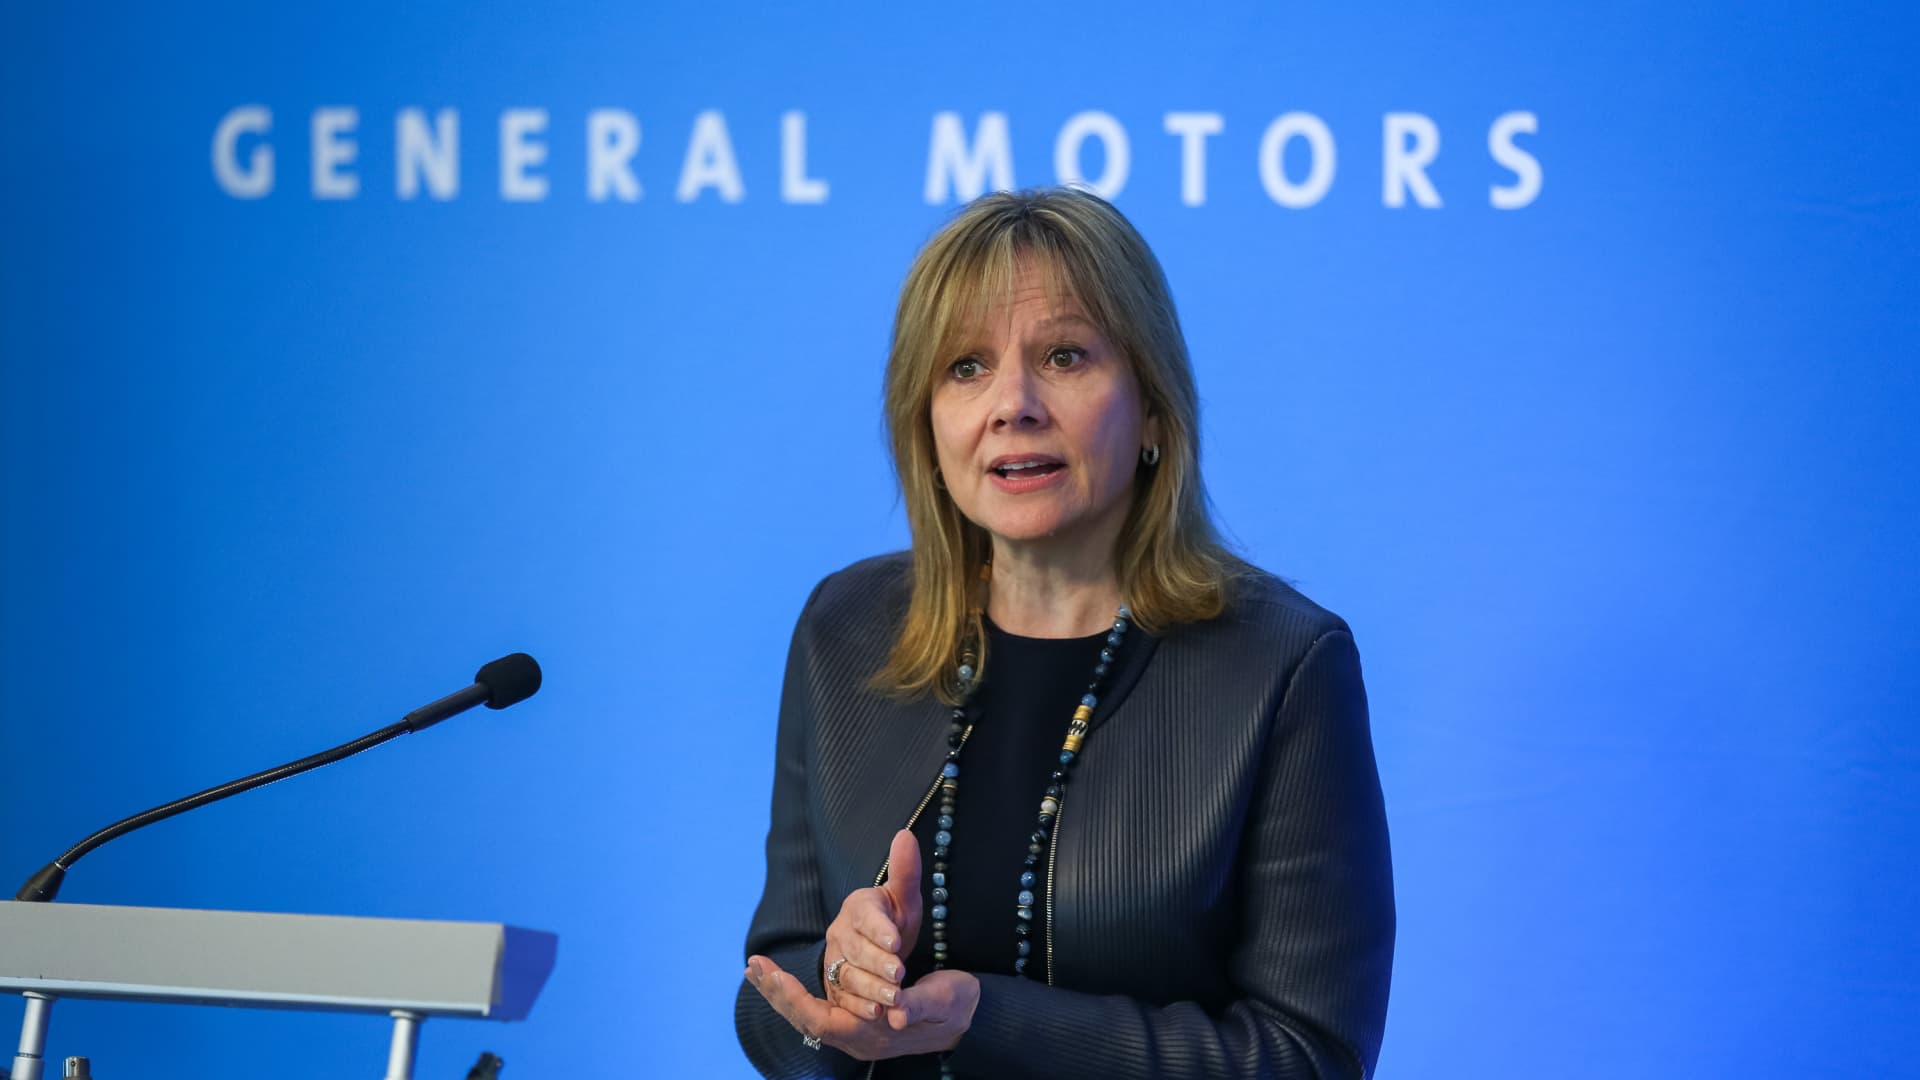 General Motors is about to report second-quarter earnings